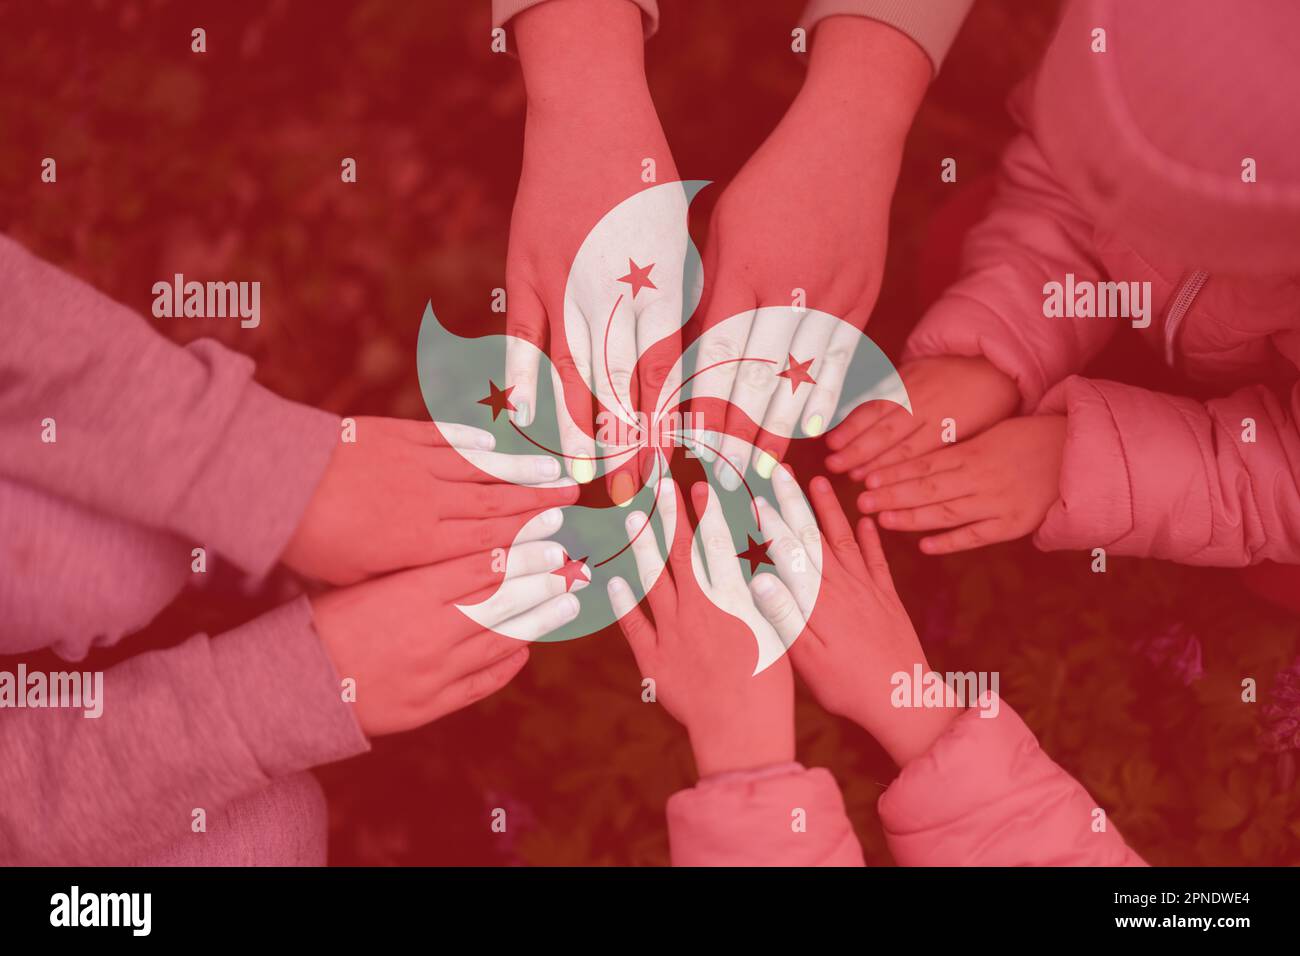 Hands of kids on background of Hong Kong  flag. Hongkonger patriotism and unity concept. Stock Photo